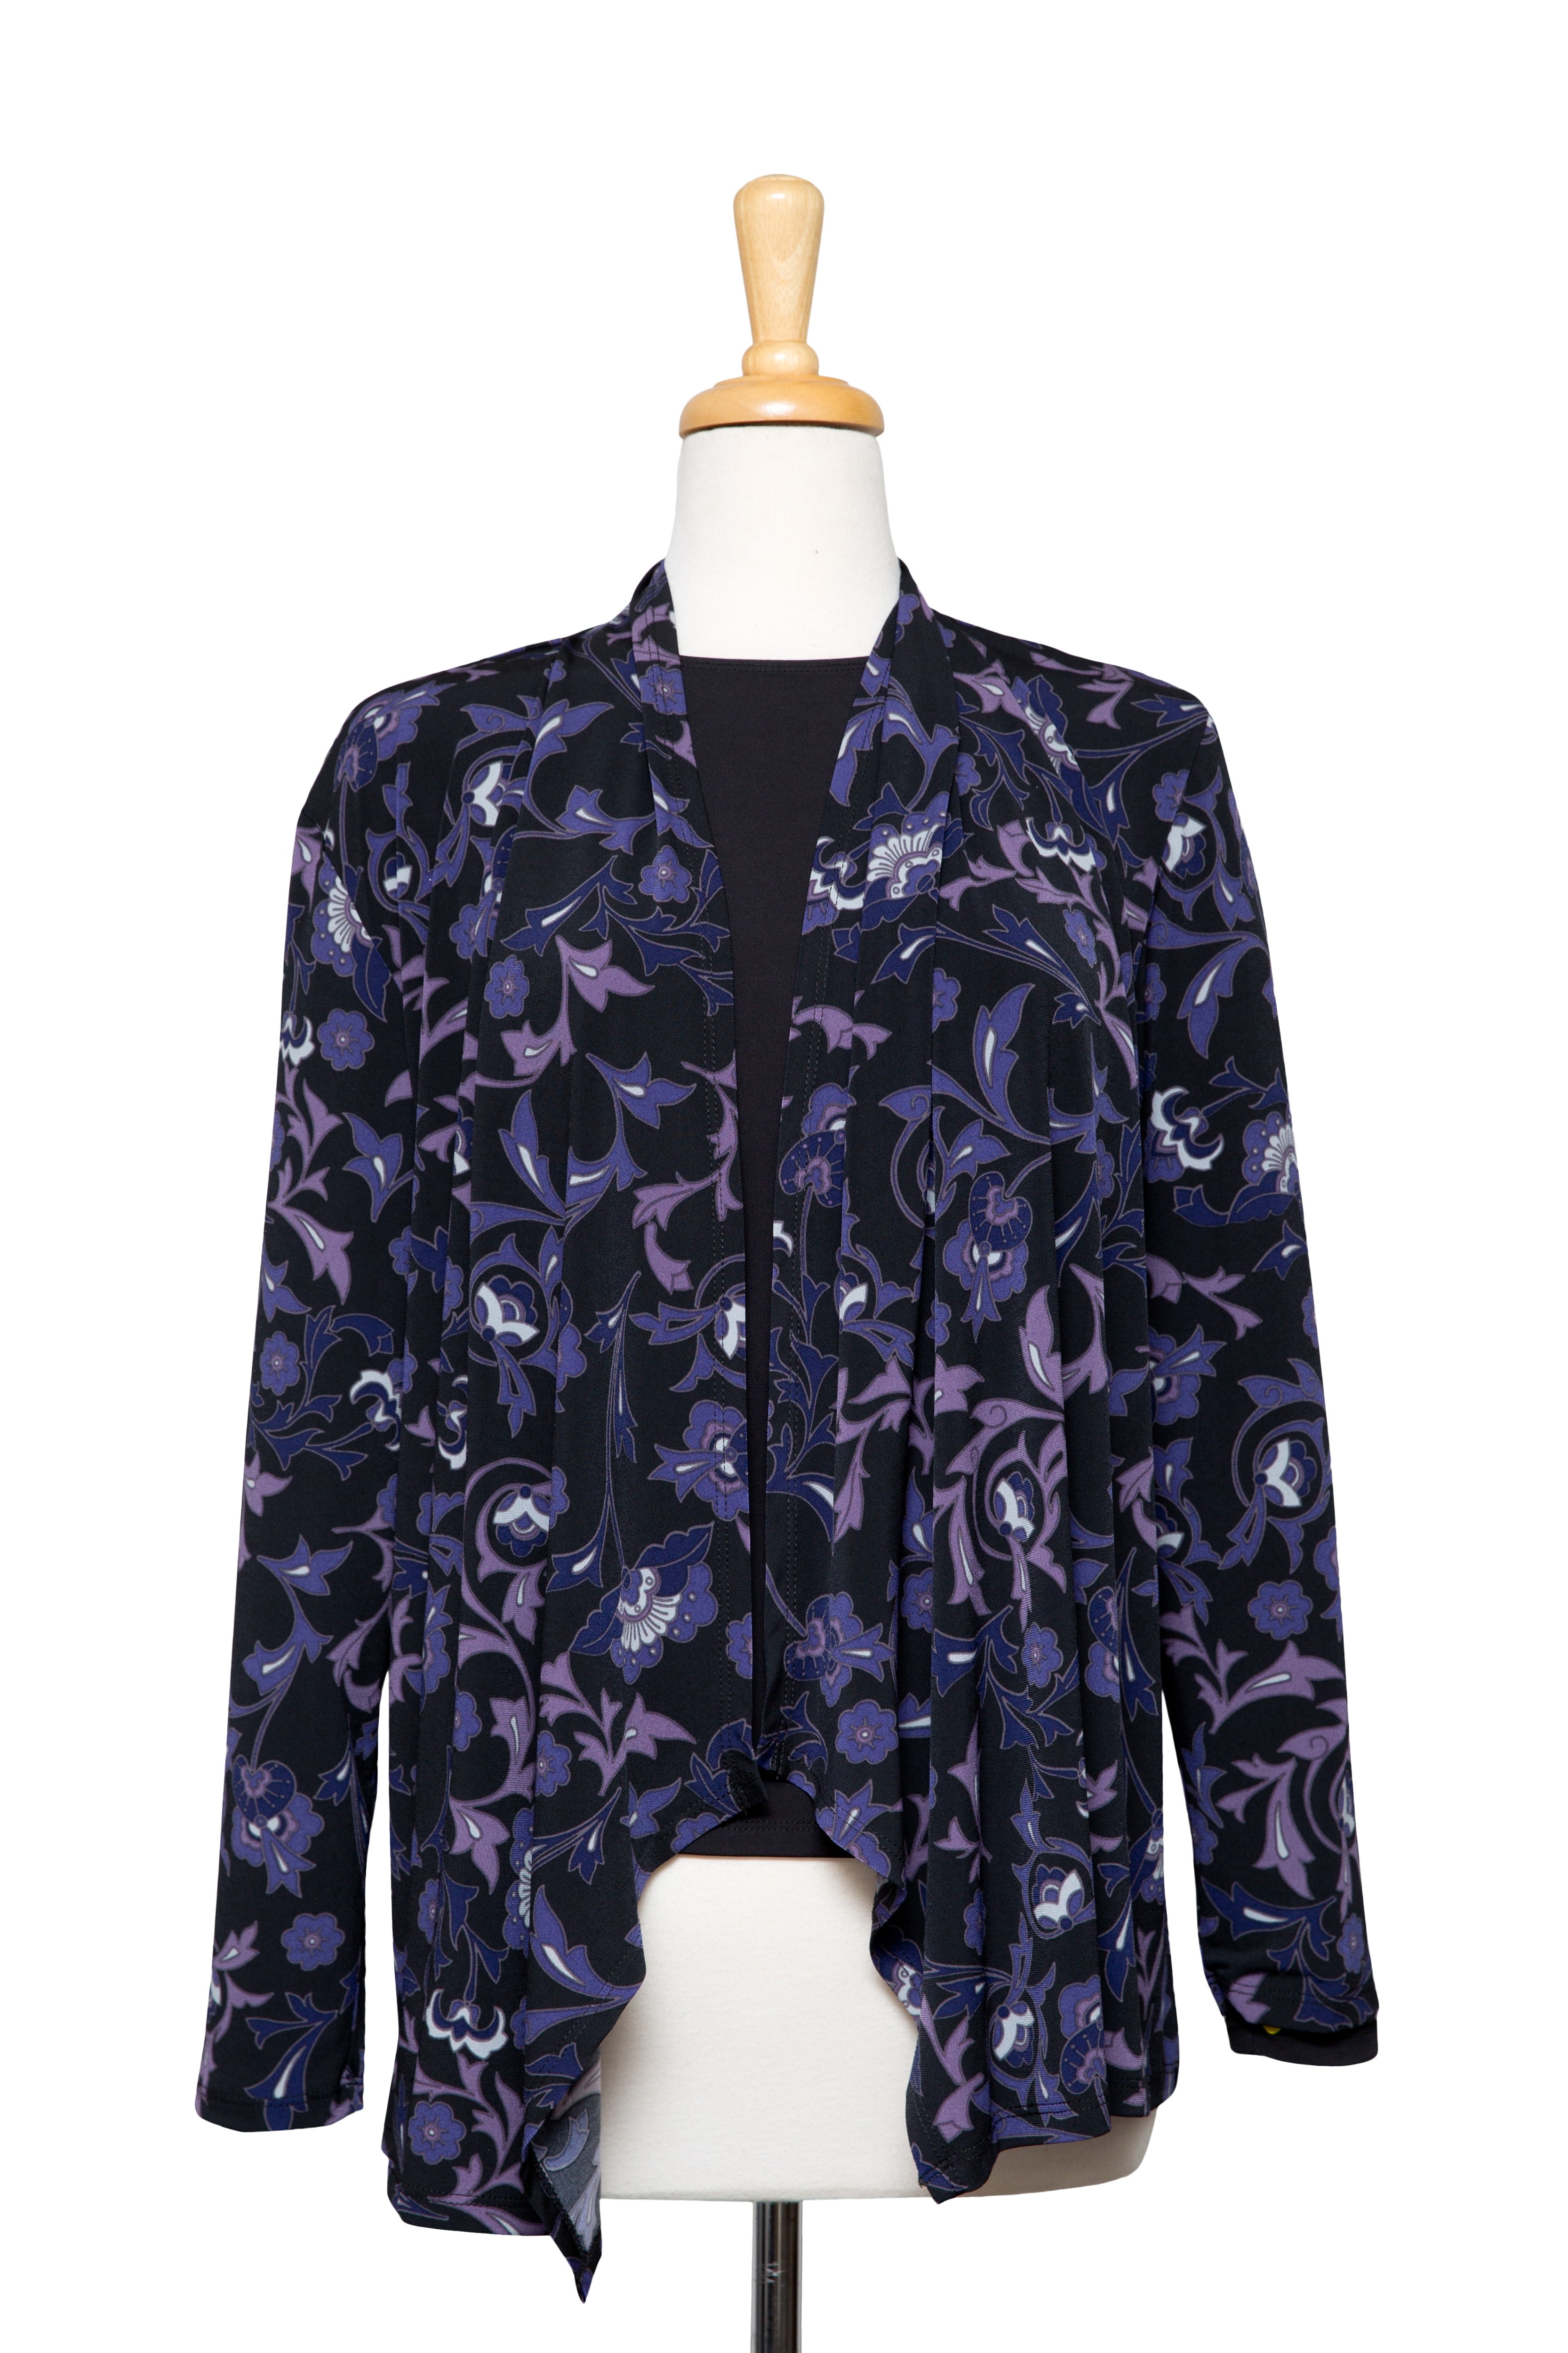  Two Piece Black and Shades of Purple Floral Microfiber Shawl Collar Set